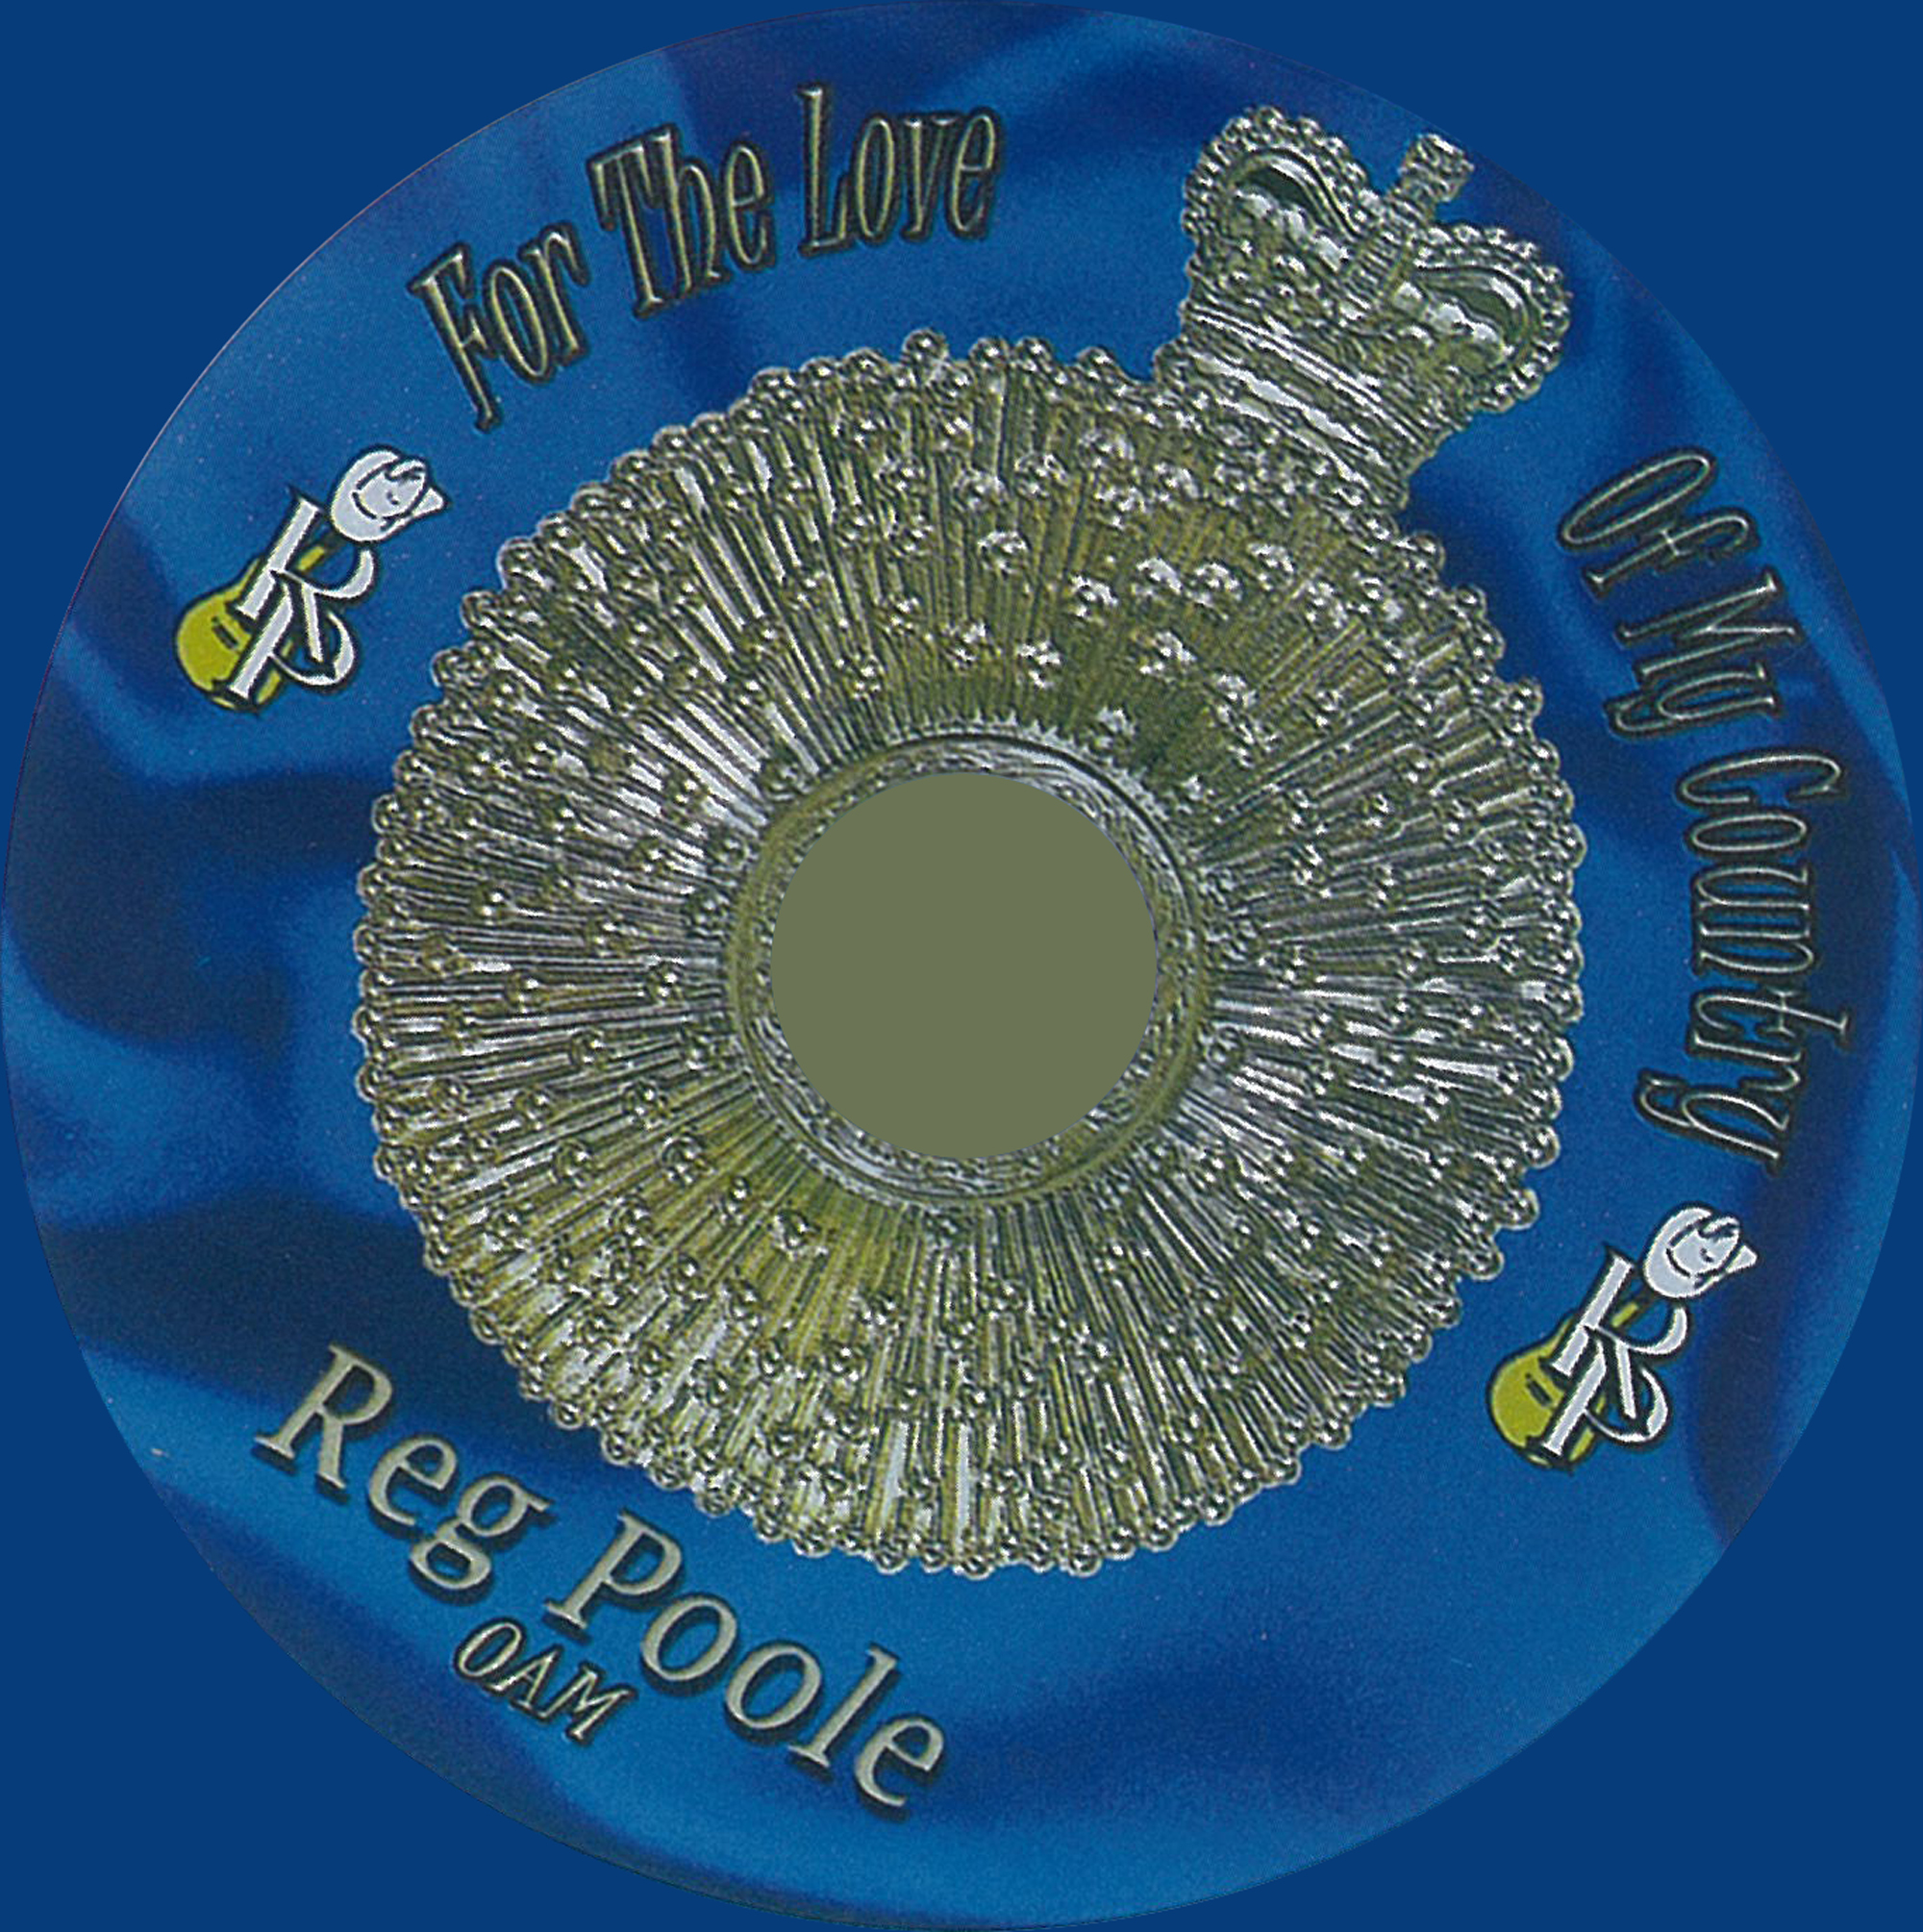 REG POOLE - FOR THE LOVE OF MY COUNTRY